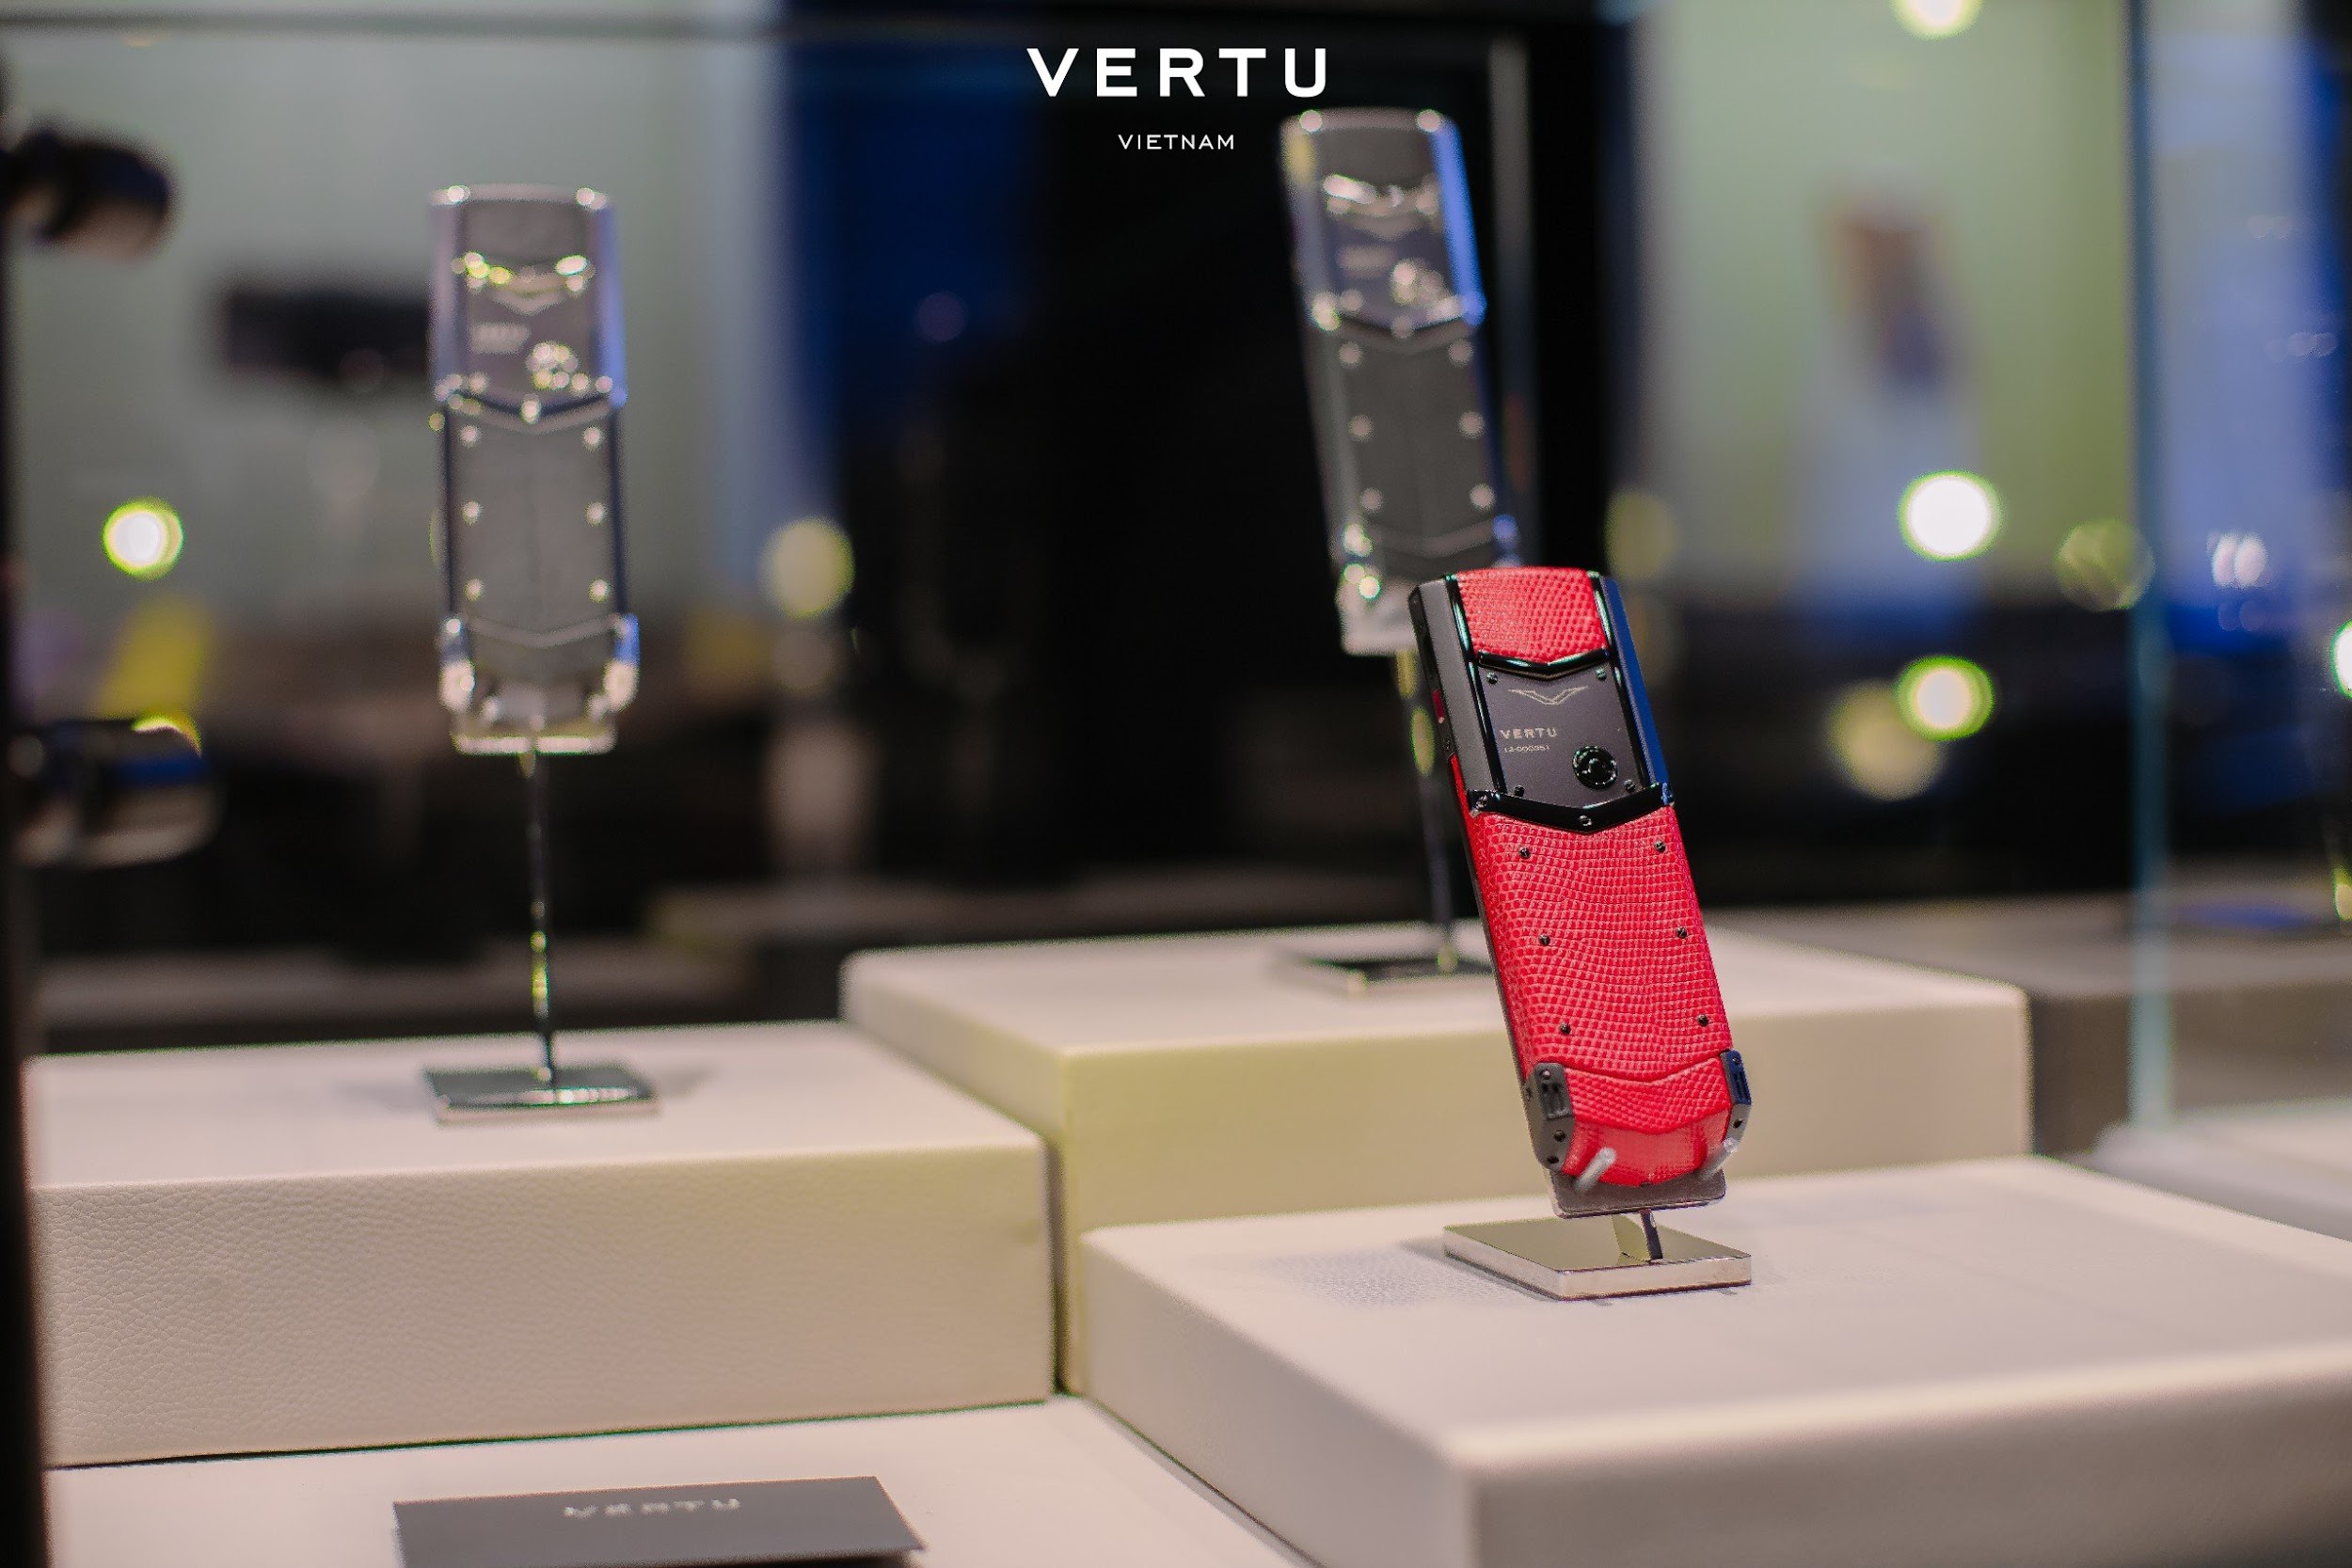 All genuine Vertu Vietnam products can be checked IMEI on the Vertu website.